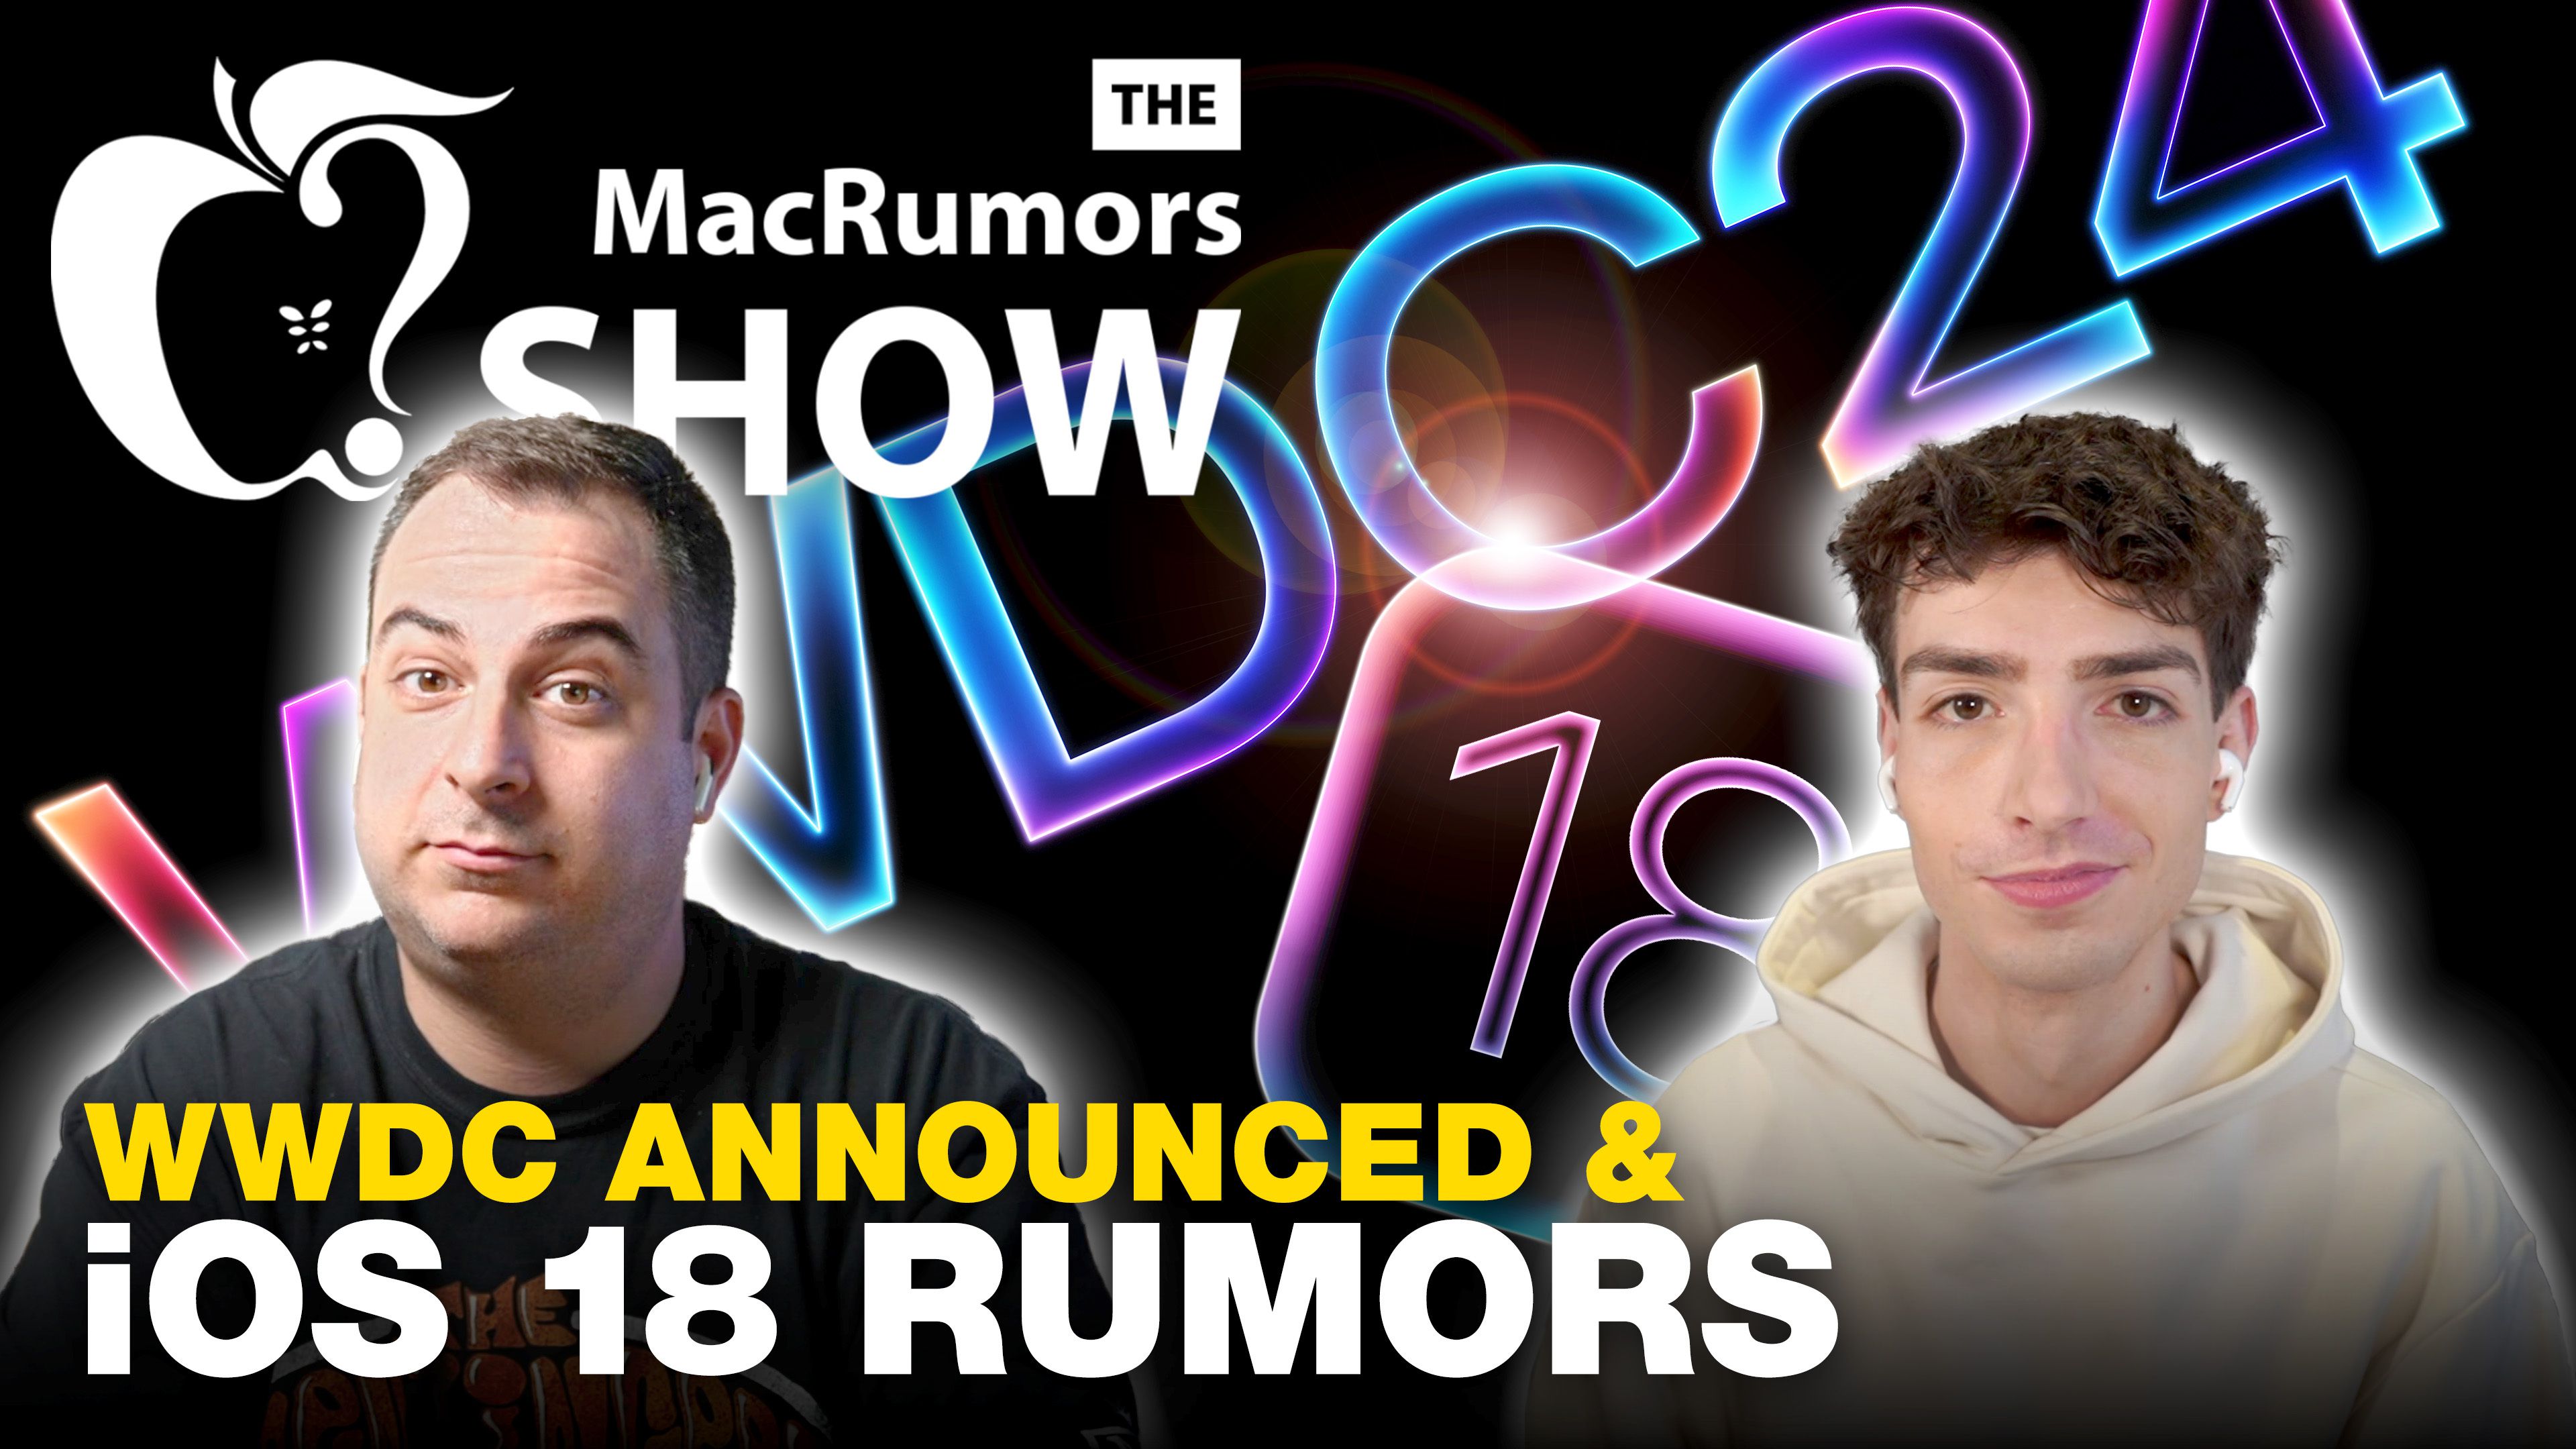 The MacRumors Show: WWDC Announced and the Latest iOS 18 Rumors